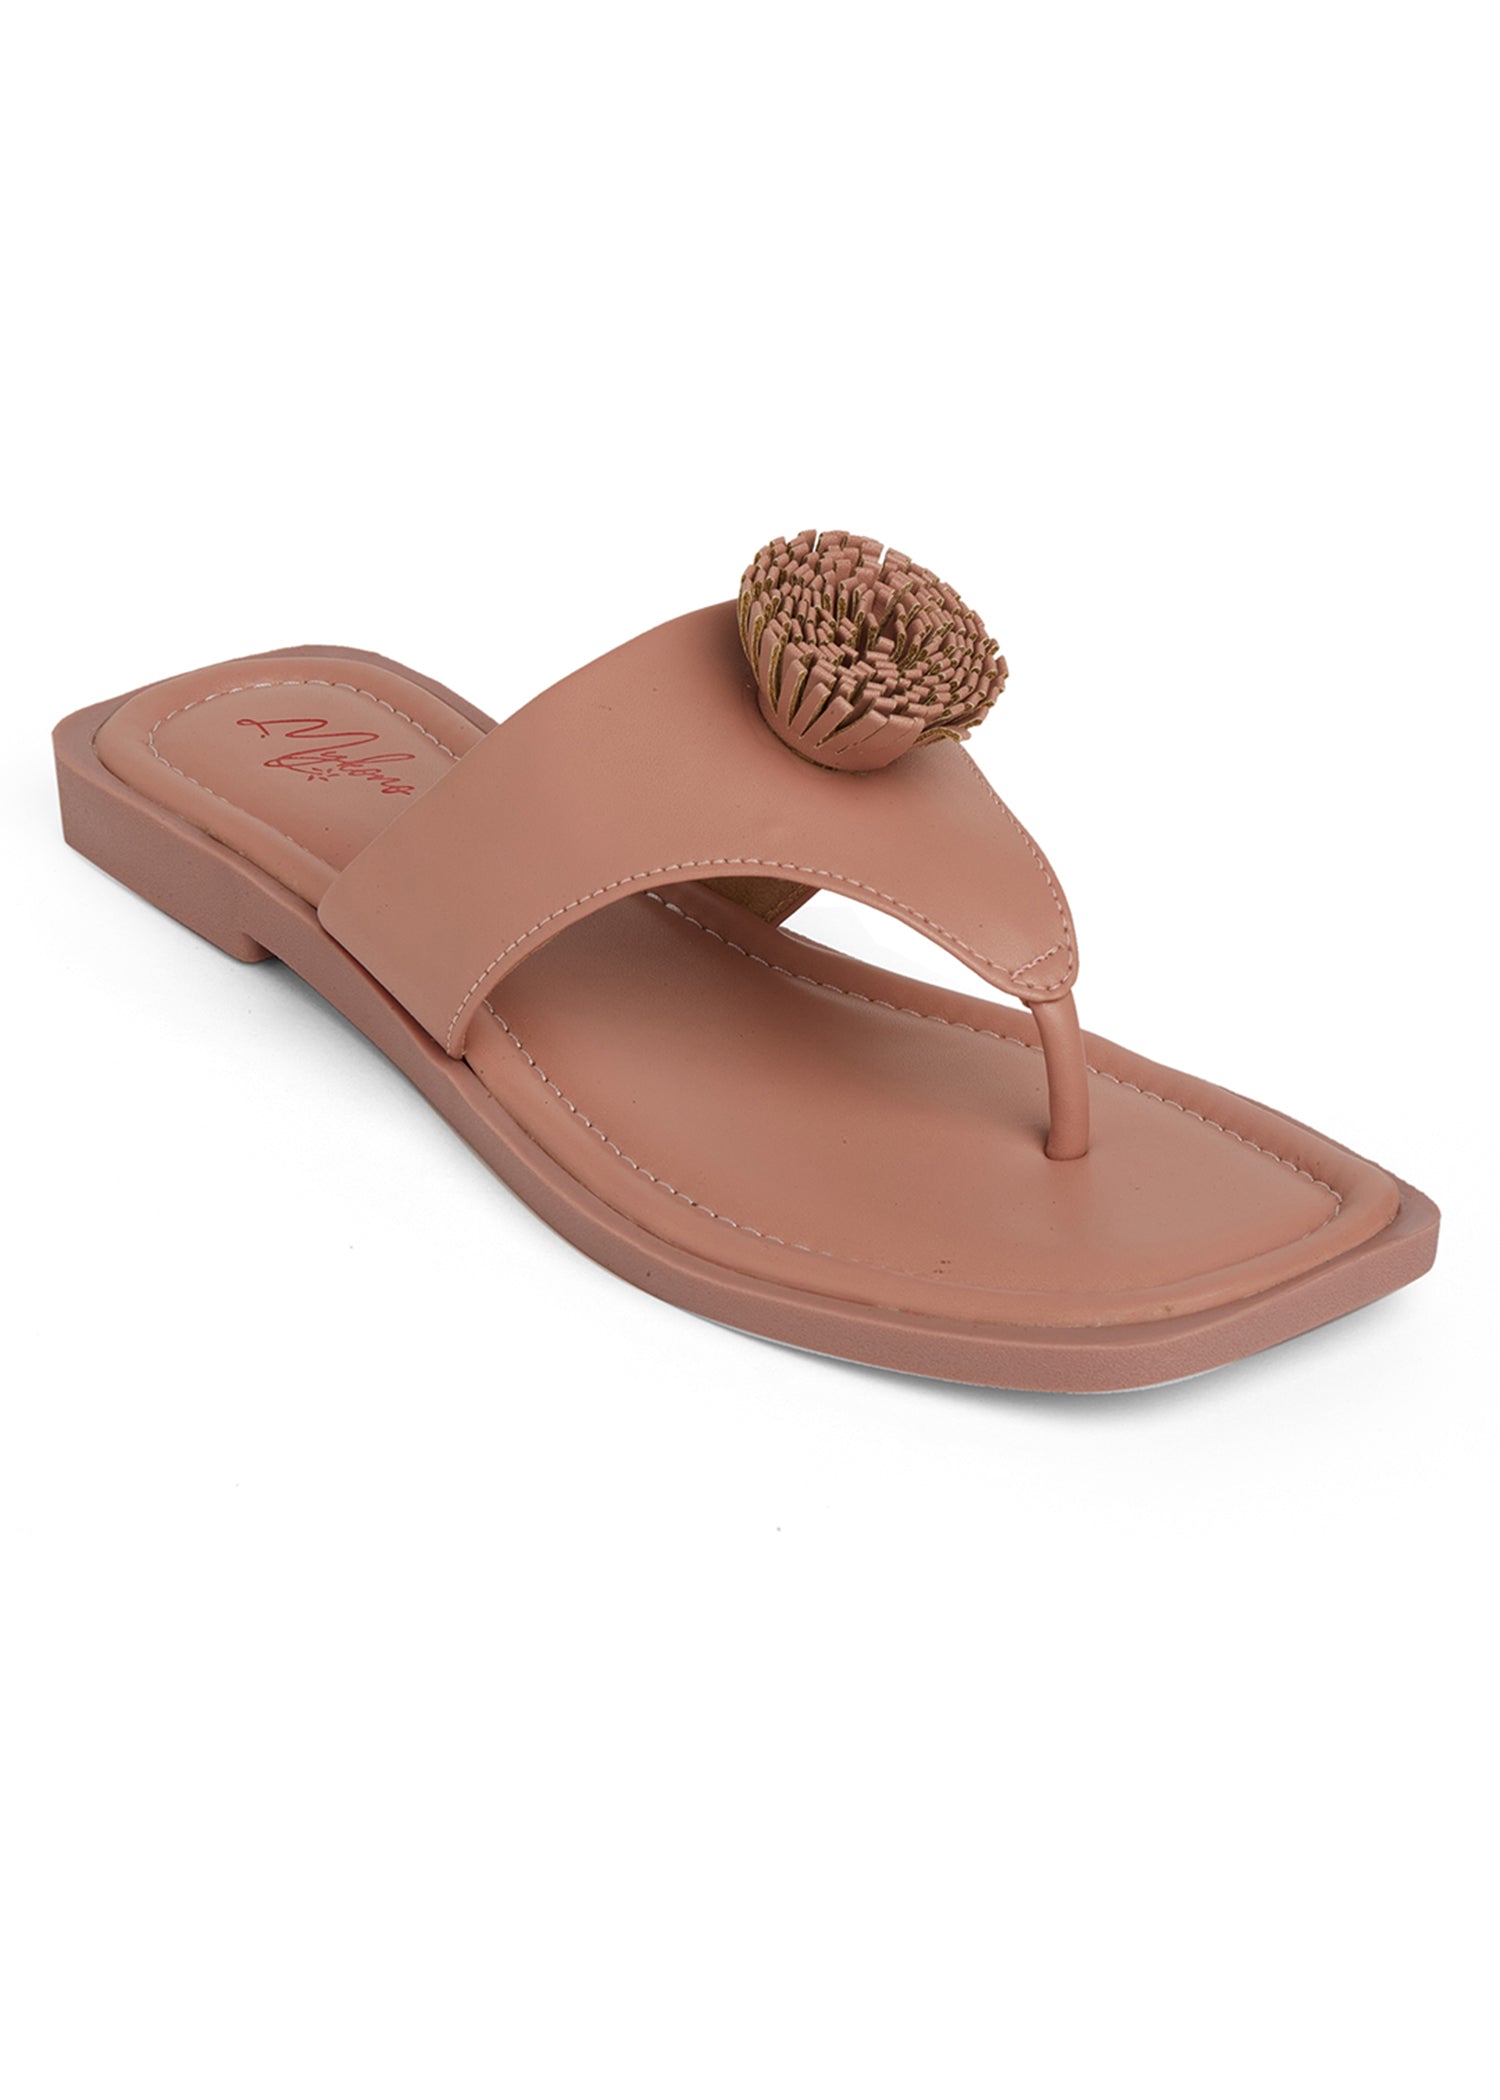 New In Ladies Flat Slippers | Konga Online Shopping